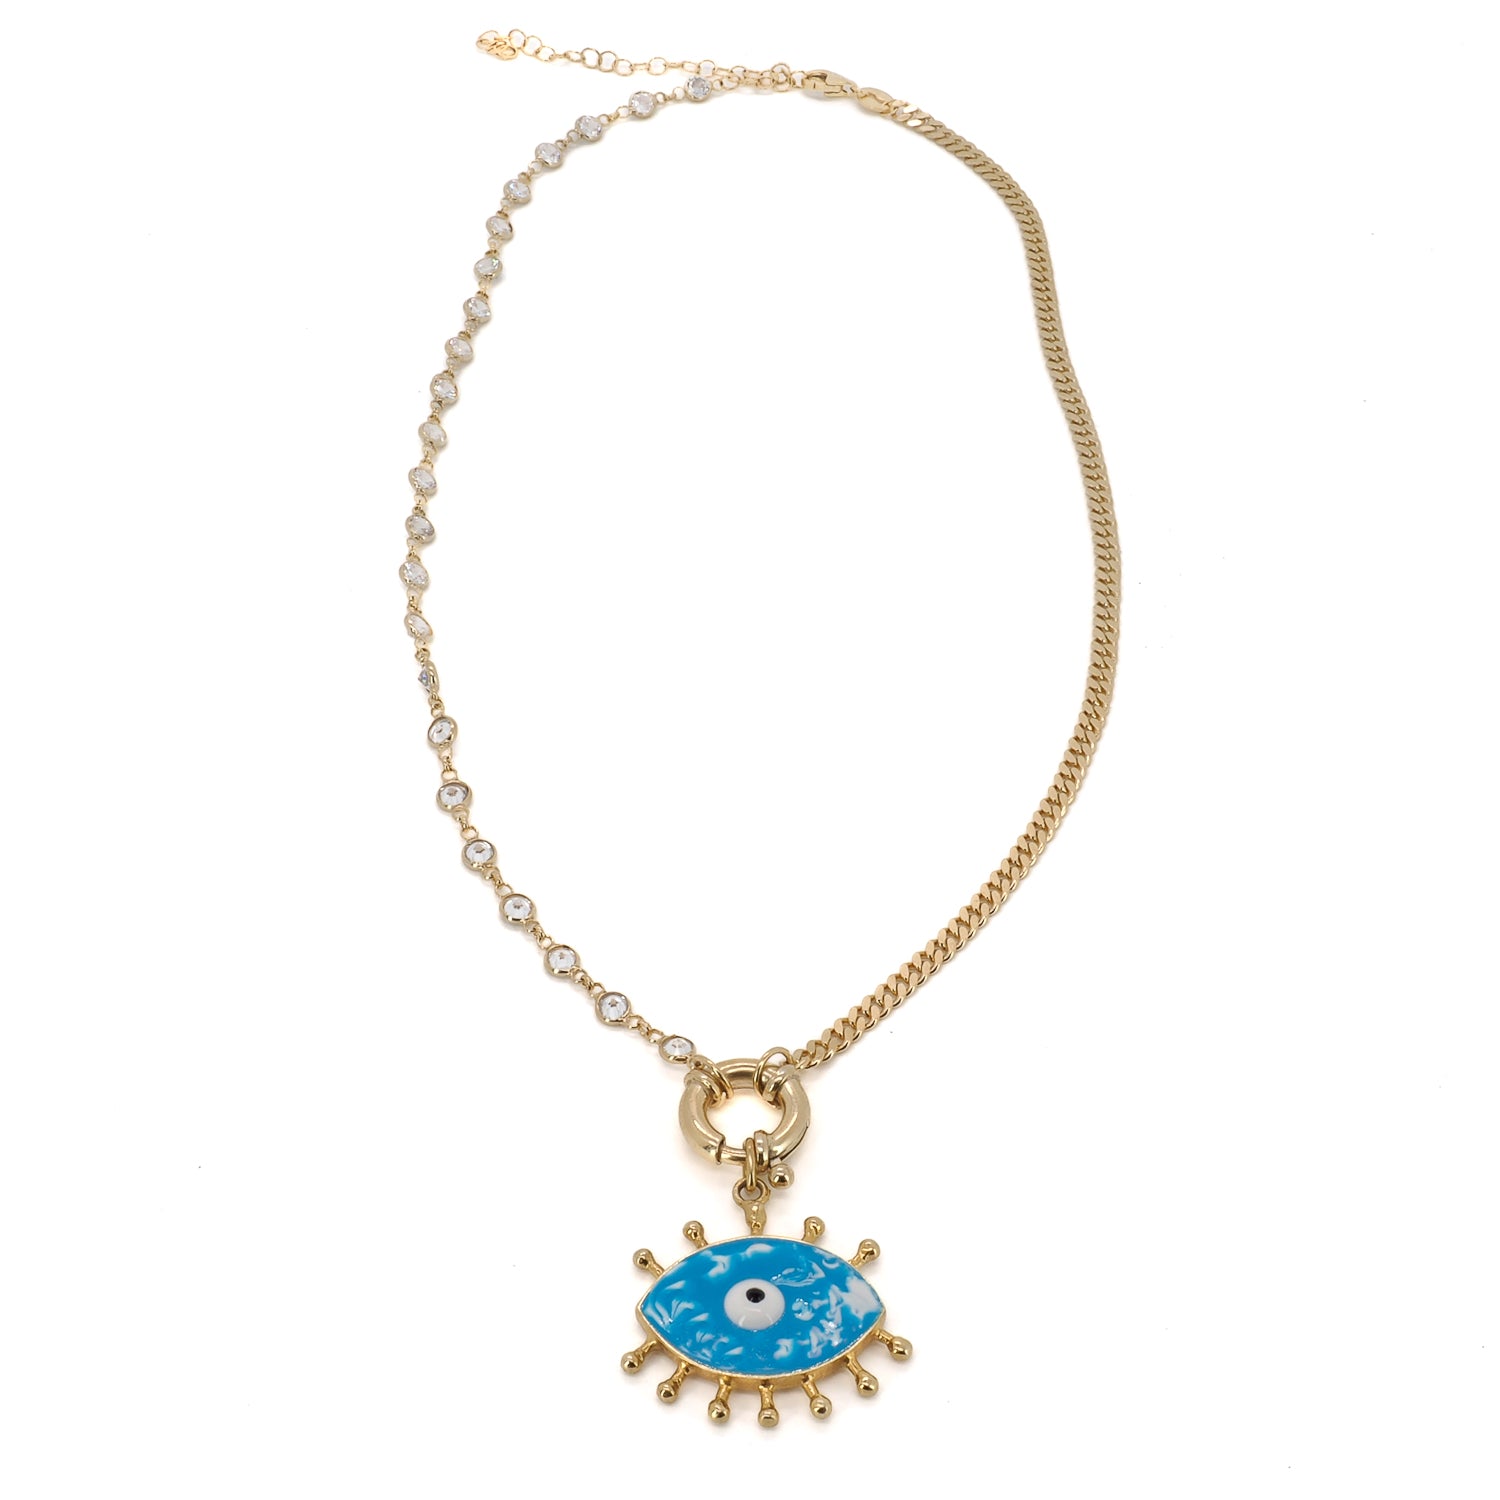 A close-up of the Turquoise Evil Eye Chain Necklace, showcasing its intricate blue enamel pendant and shimmering Swarovski stones.